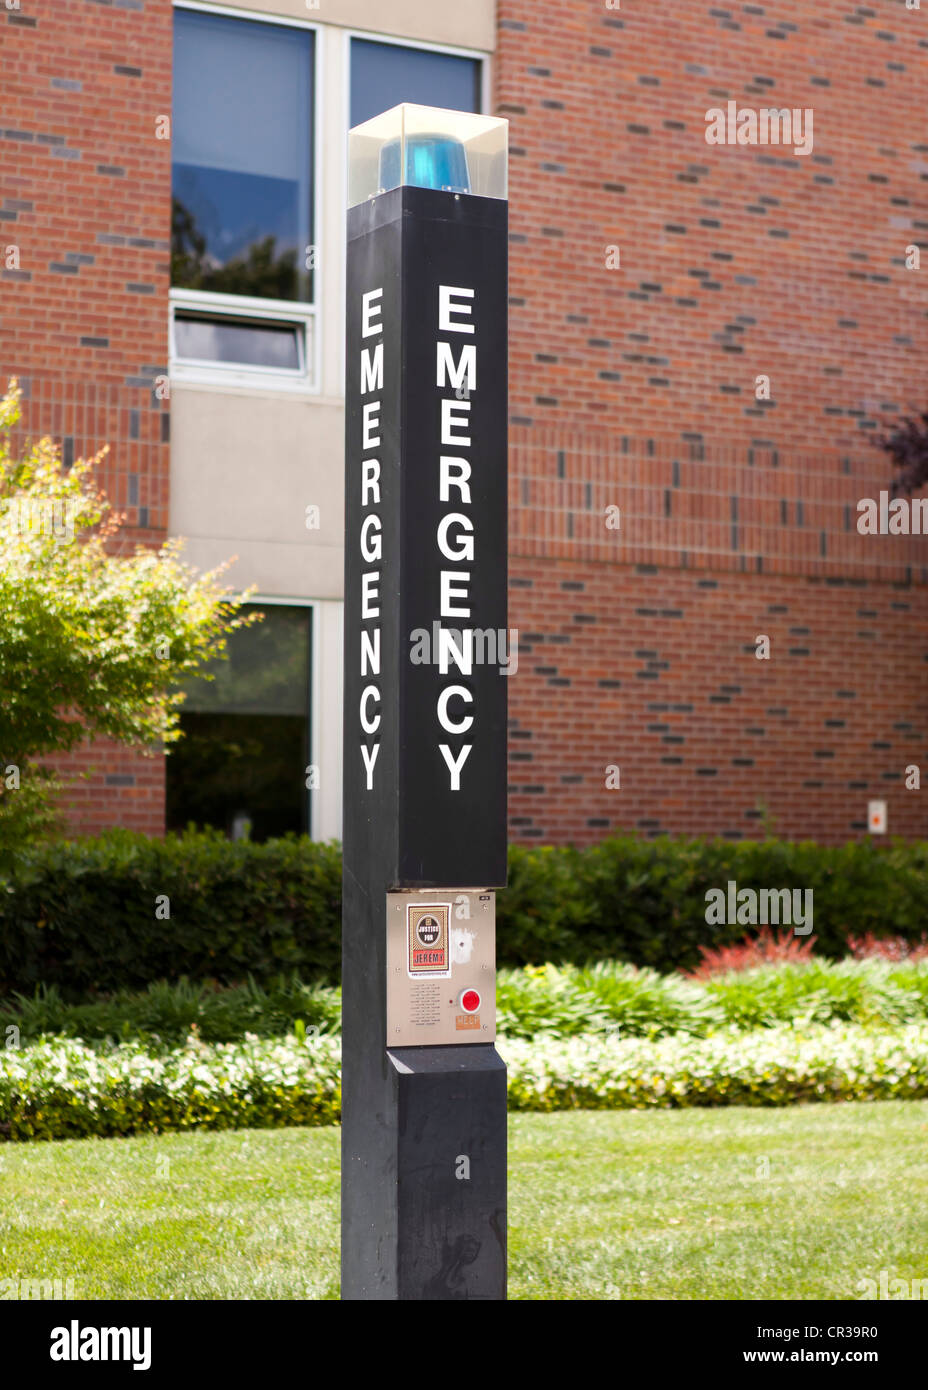 Emergency call station on college campus Stock Photo